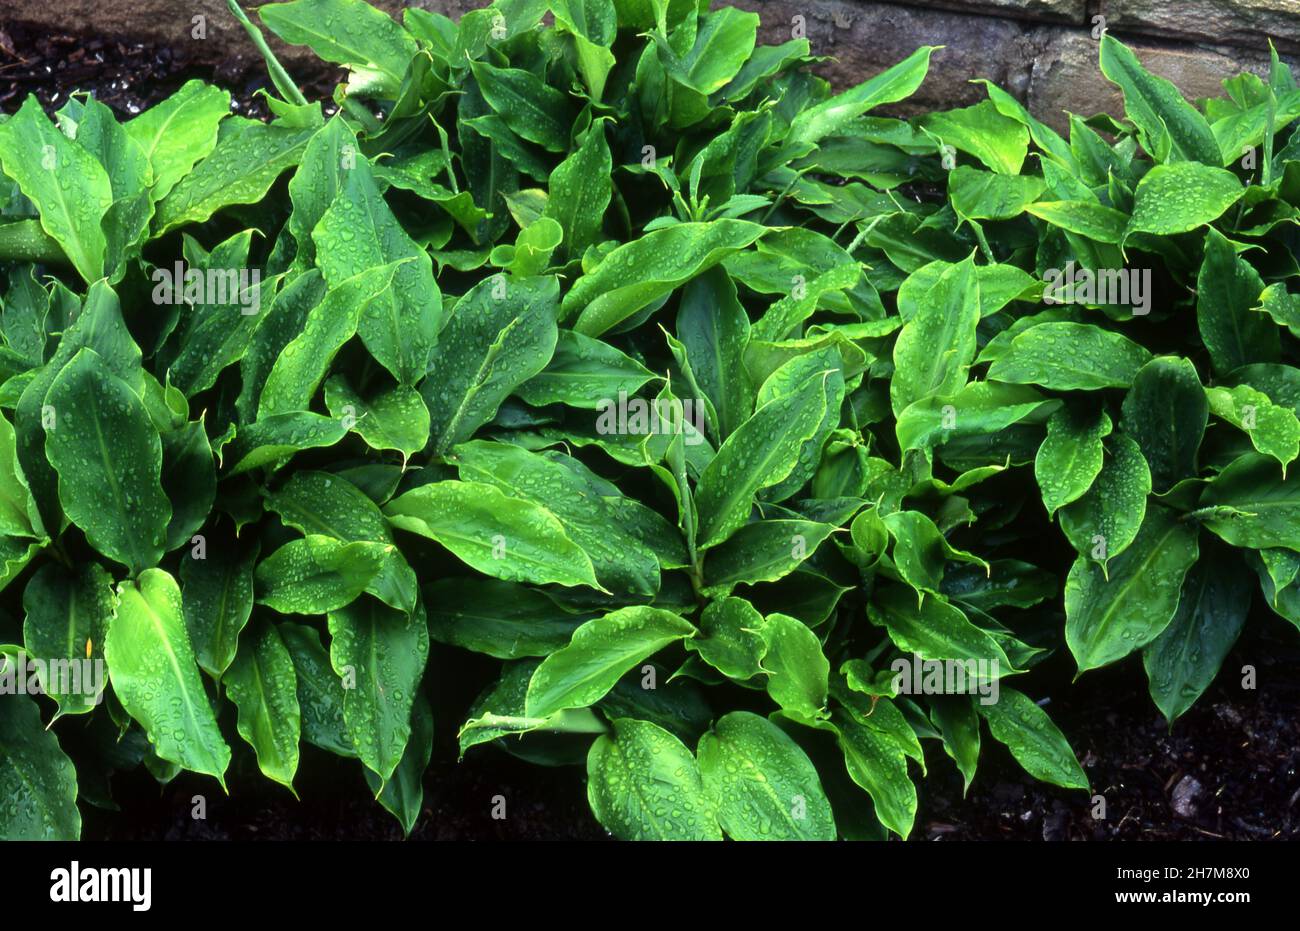 ELETTARIA CARDAMOMUM (COMMONLY KNOWN AS GREEN OR TRUE CARDAMOM) Stock Photo